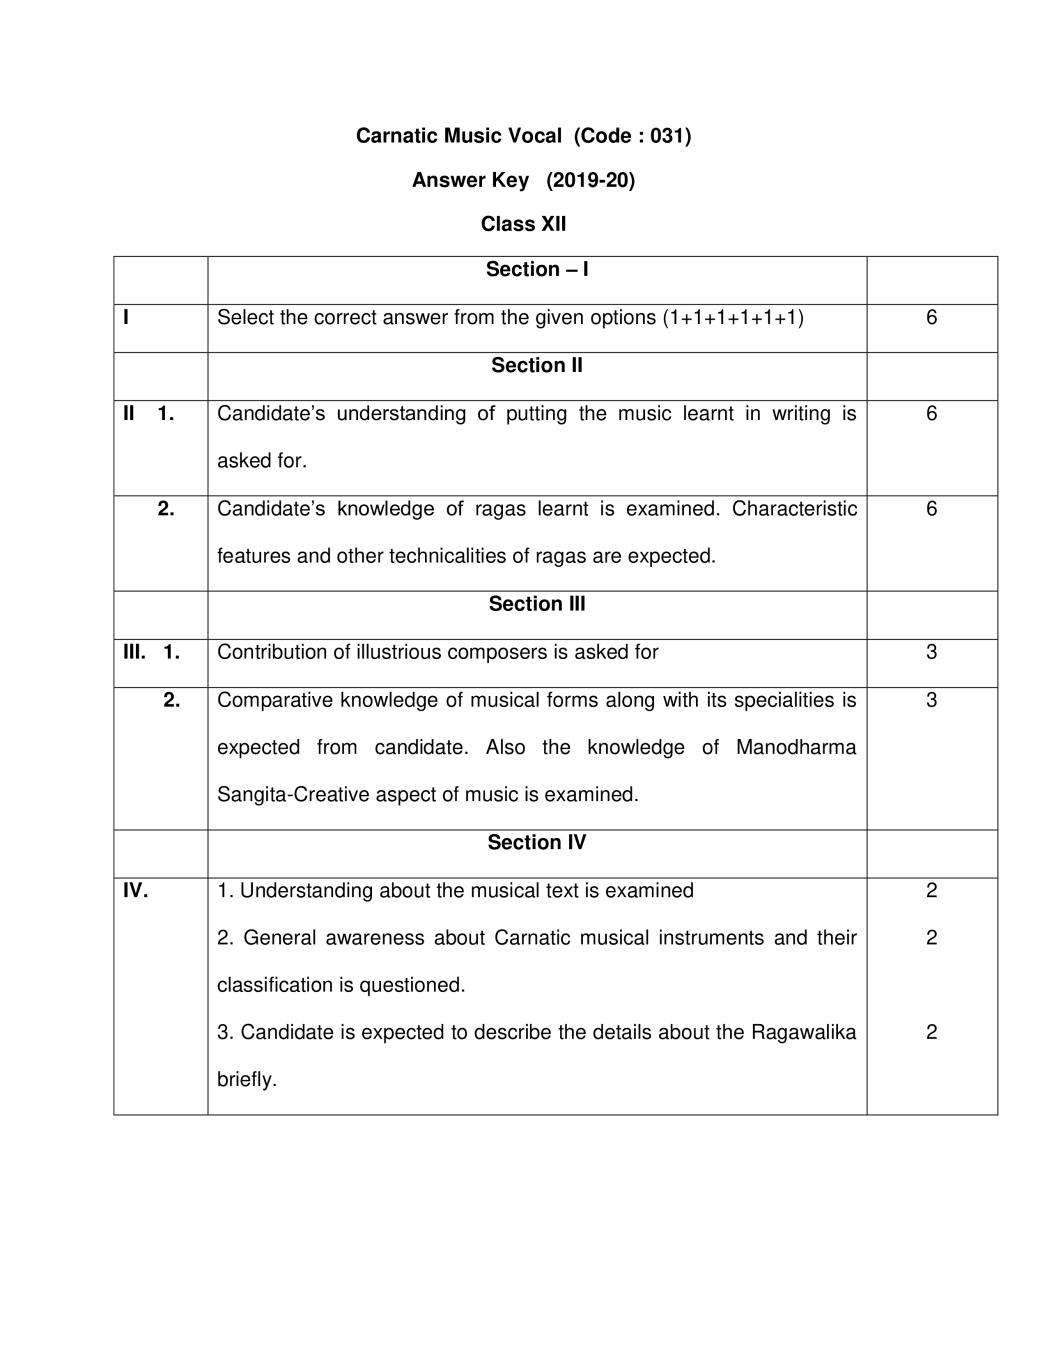 CBSE Class 12 Marking Scheme 2020 for Carnatic Music (Vocal) - Page 1